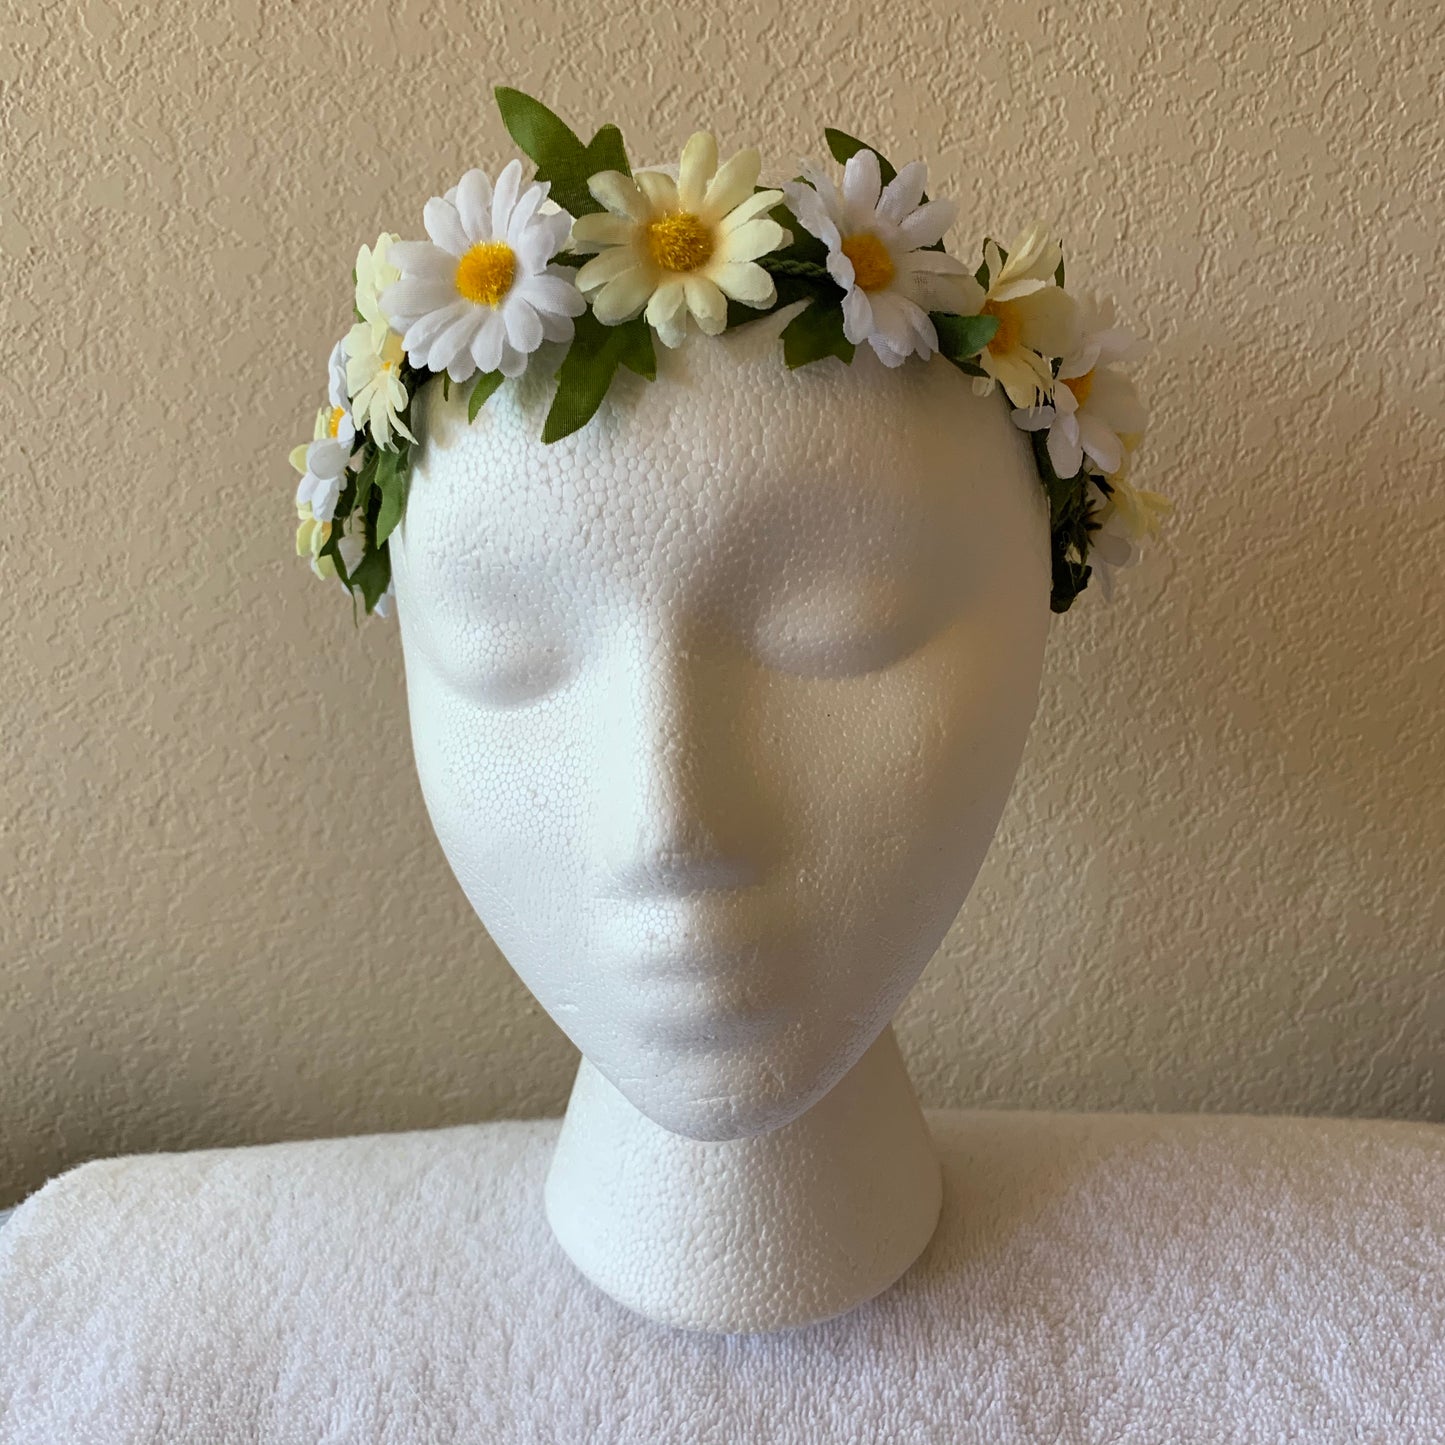 Extra Small Wreath - White and Pale Yellow Daisies